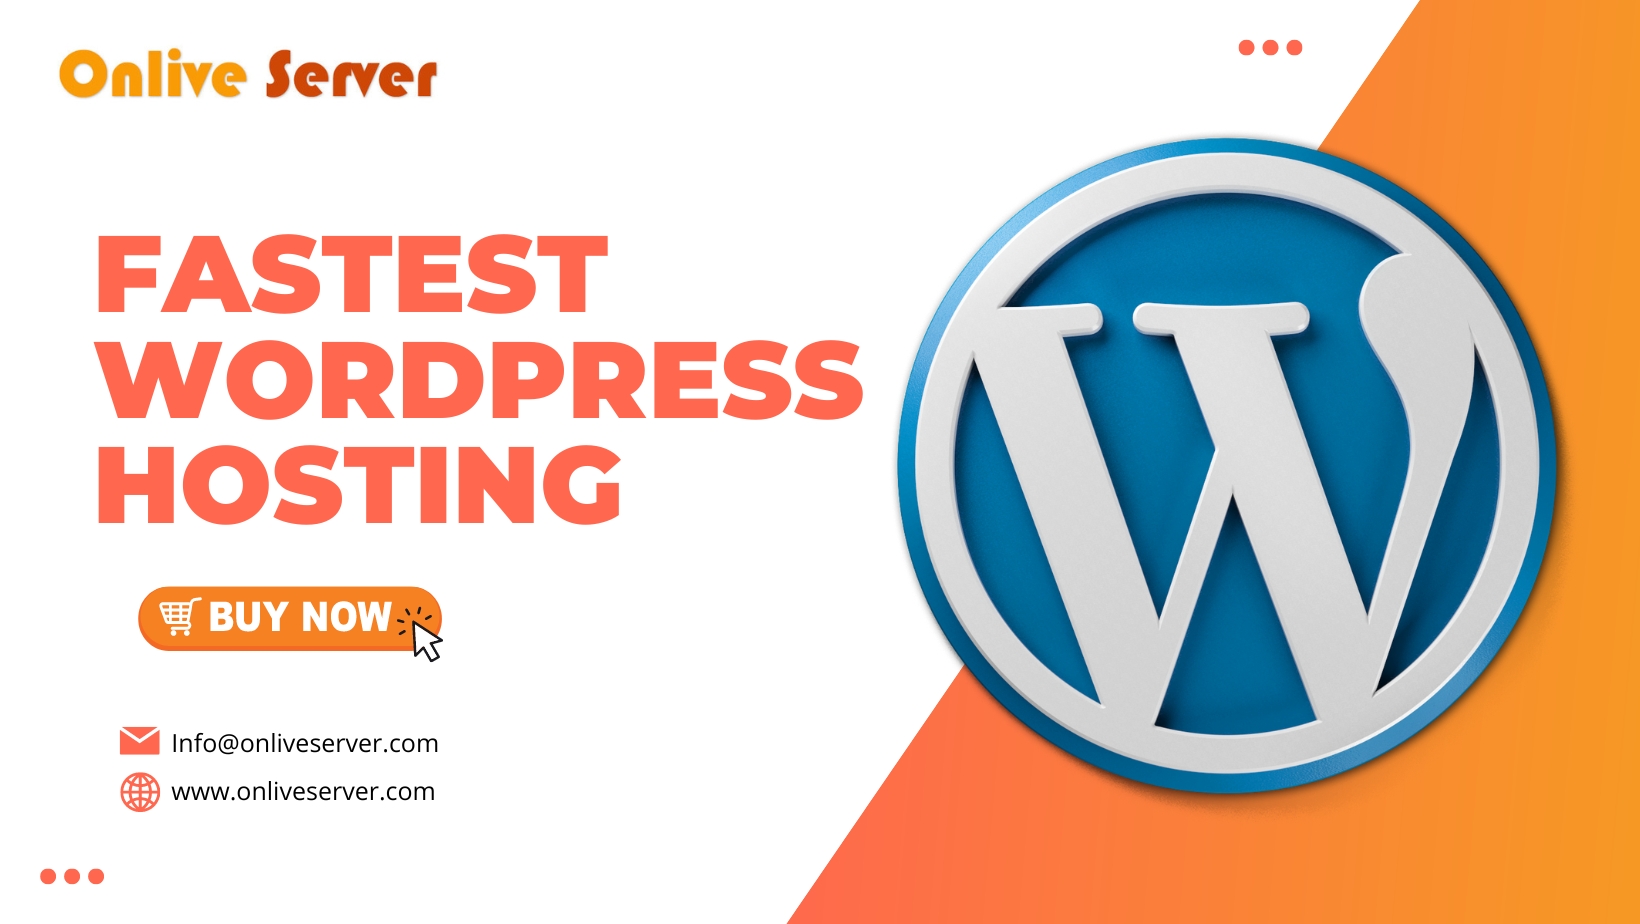 WordPress Hosting: What to Look for in a Fast and Reliable Provider